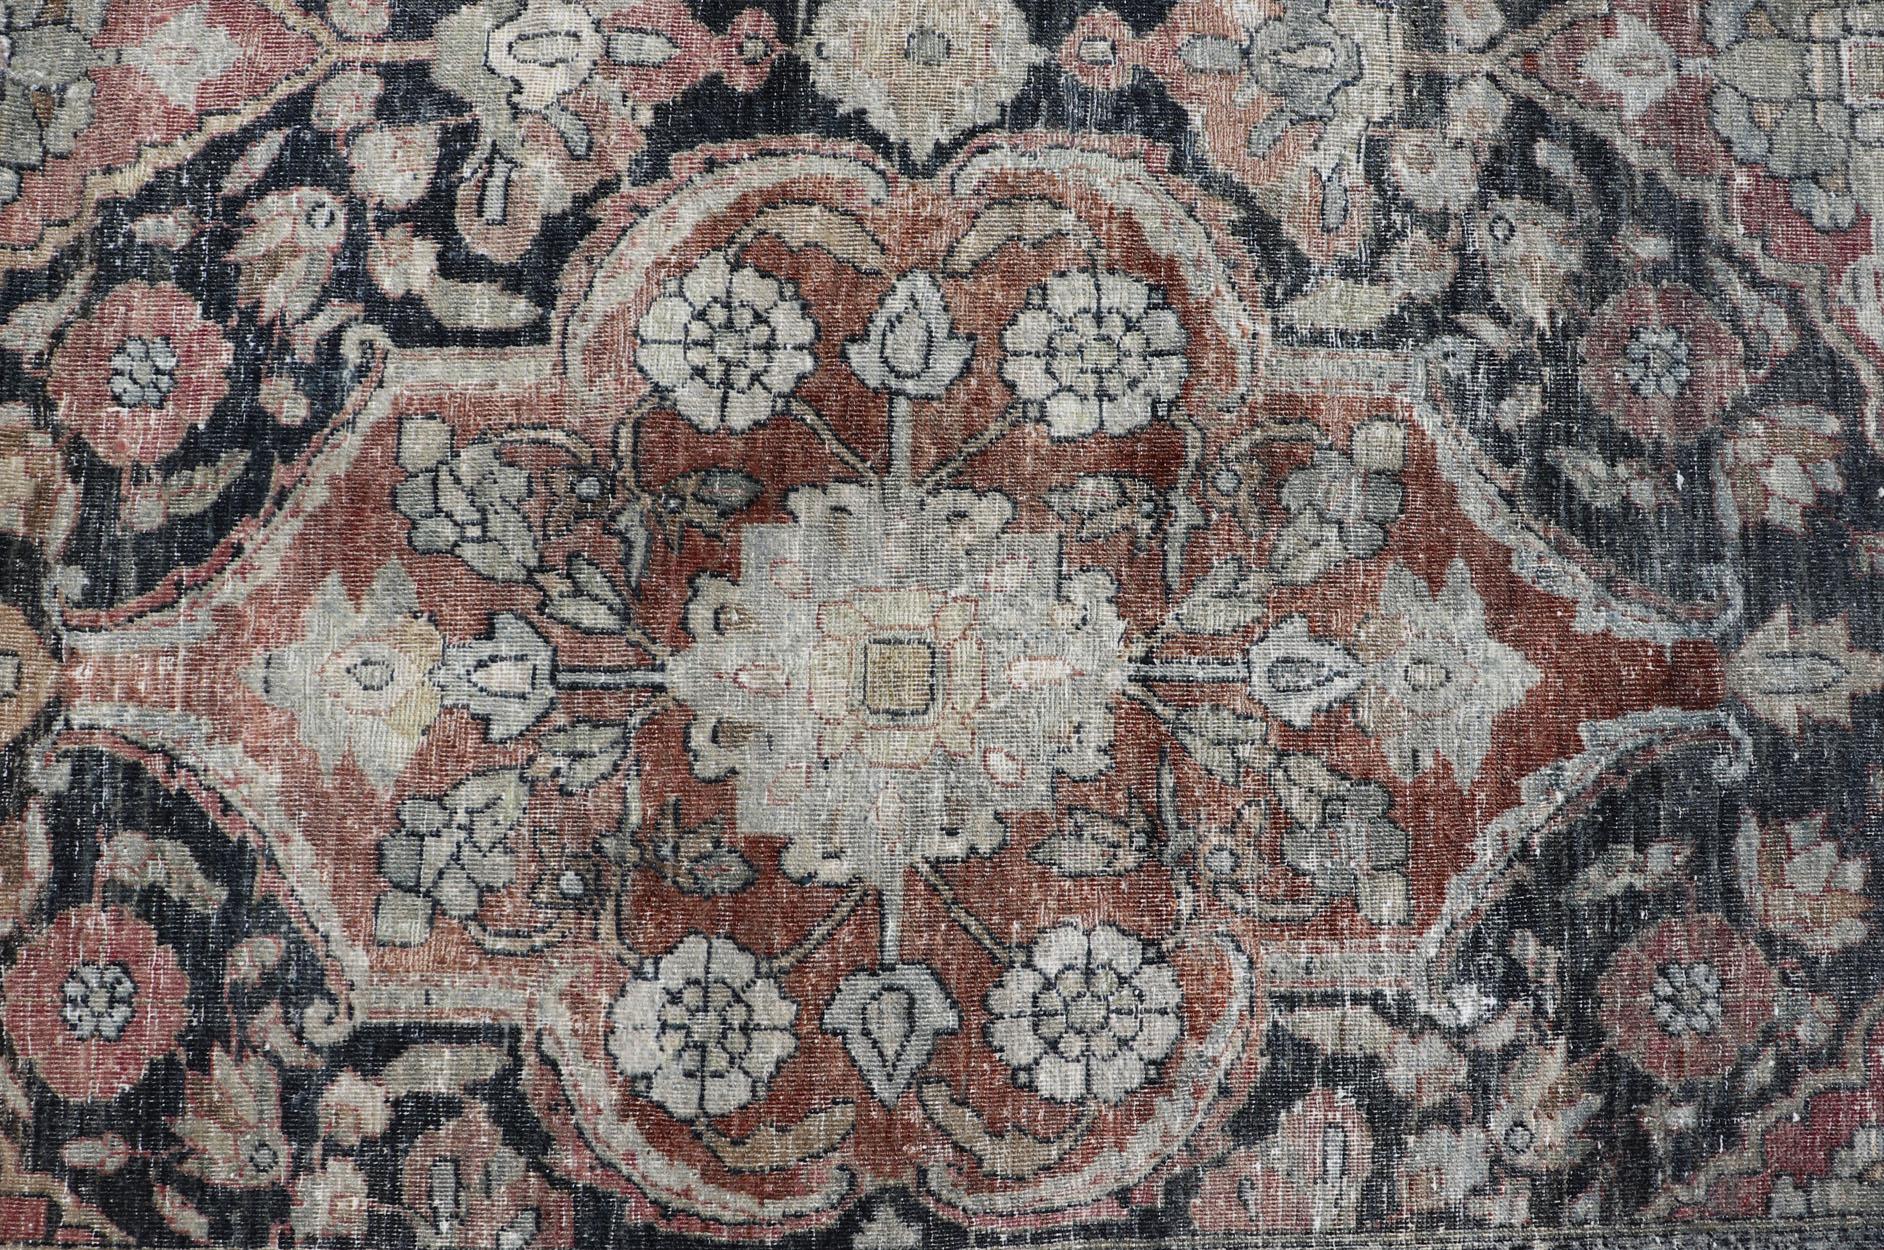 Antique Destressed Persian Yazd Rug in Charcoal, Copper, Warm Gray, Taupe & Rose For Sale 7